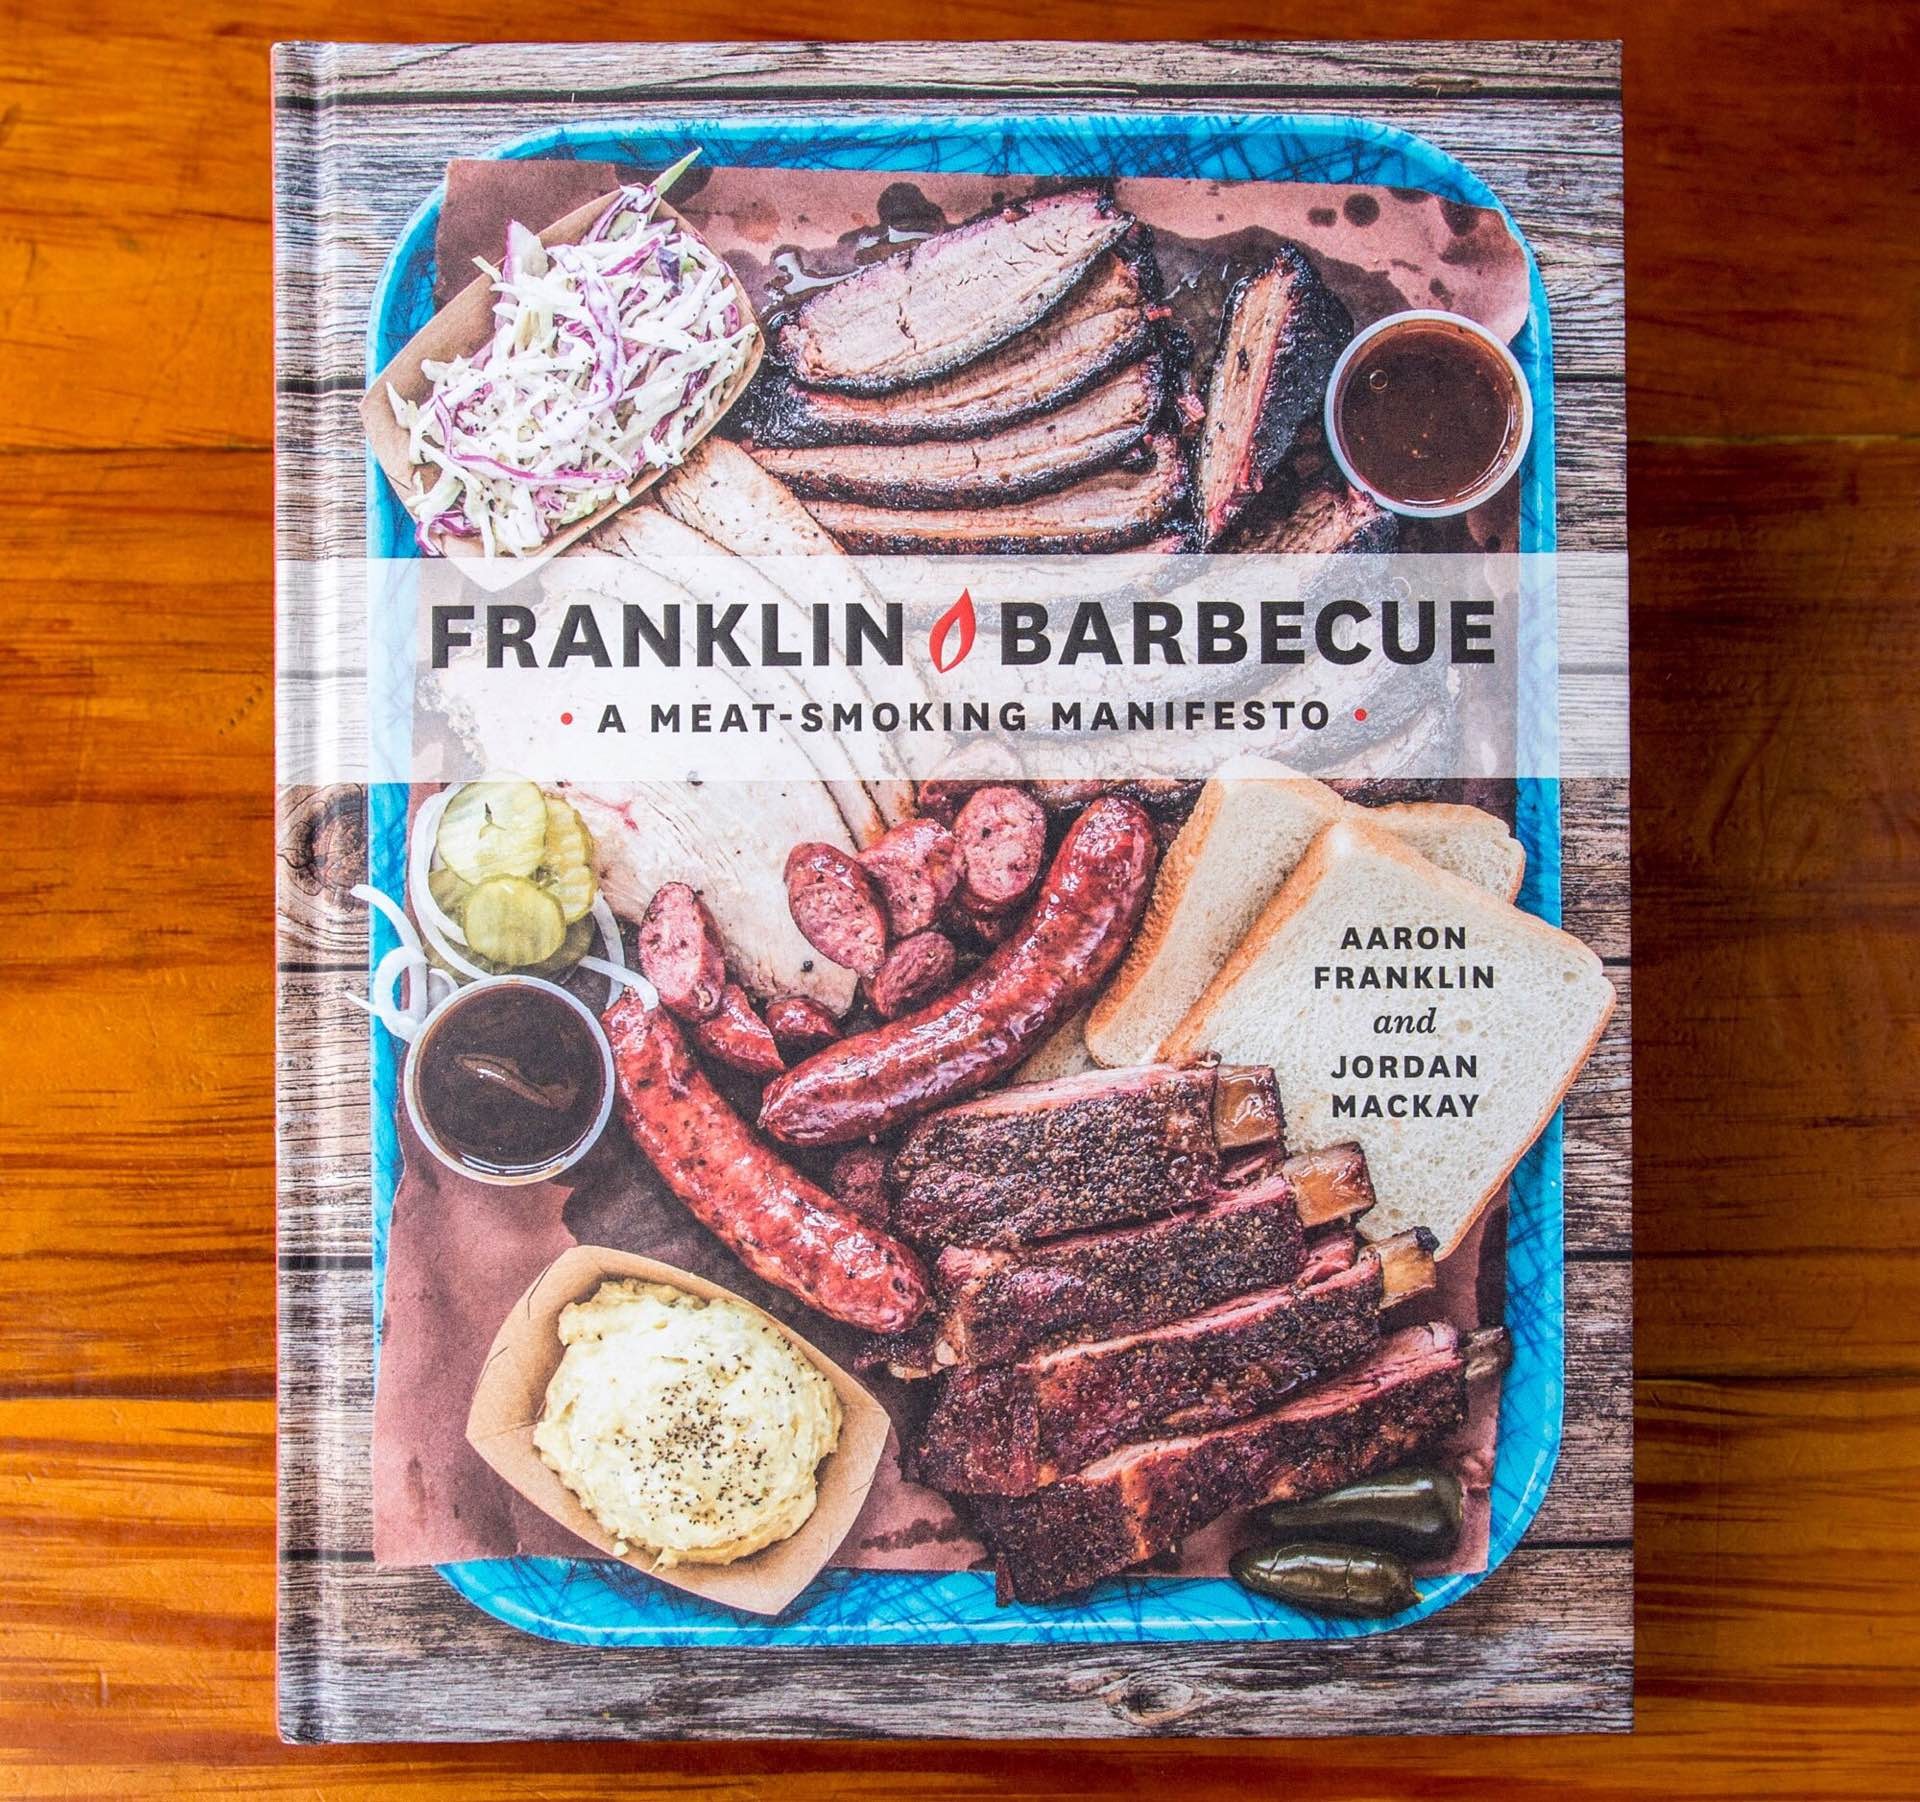 Franklin Barbecue: A Meat-Smoking Manifesto by Aaron Franklin and Jordan Mackay.